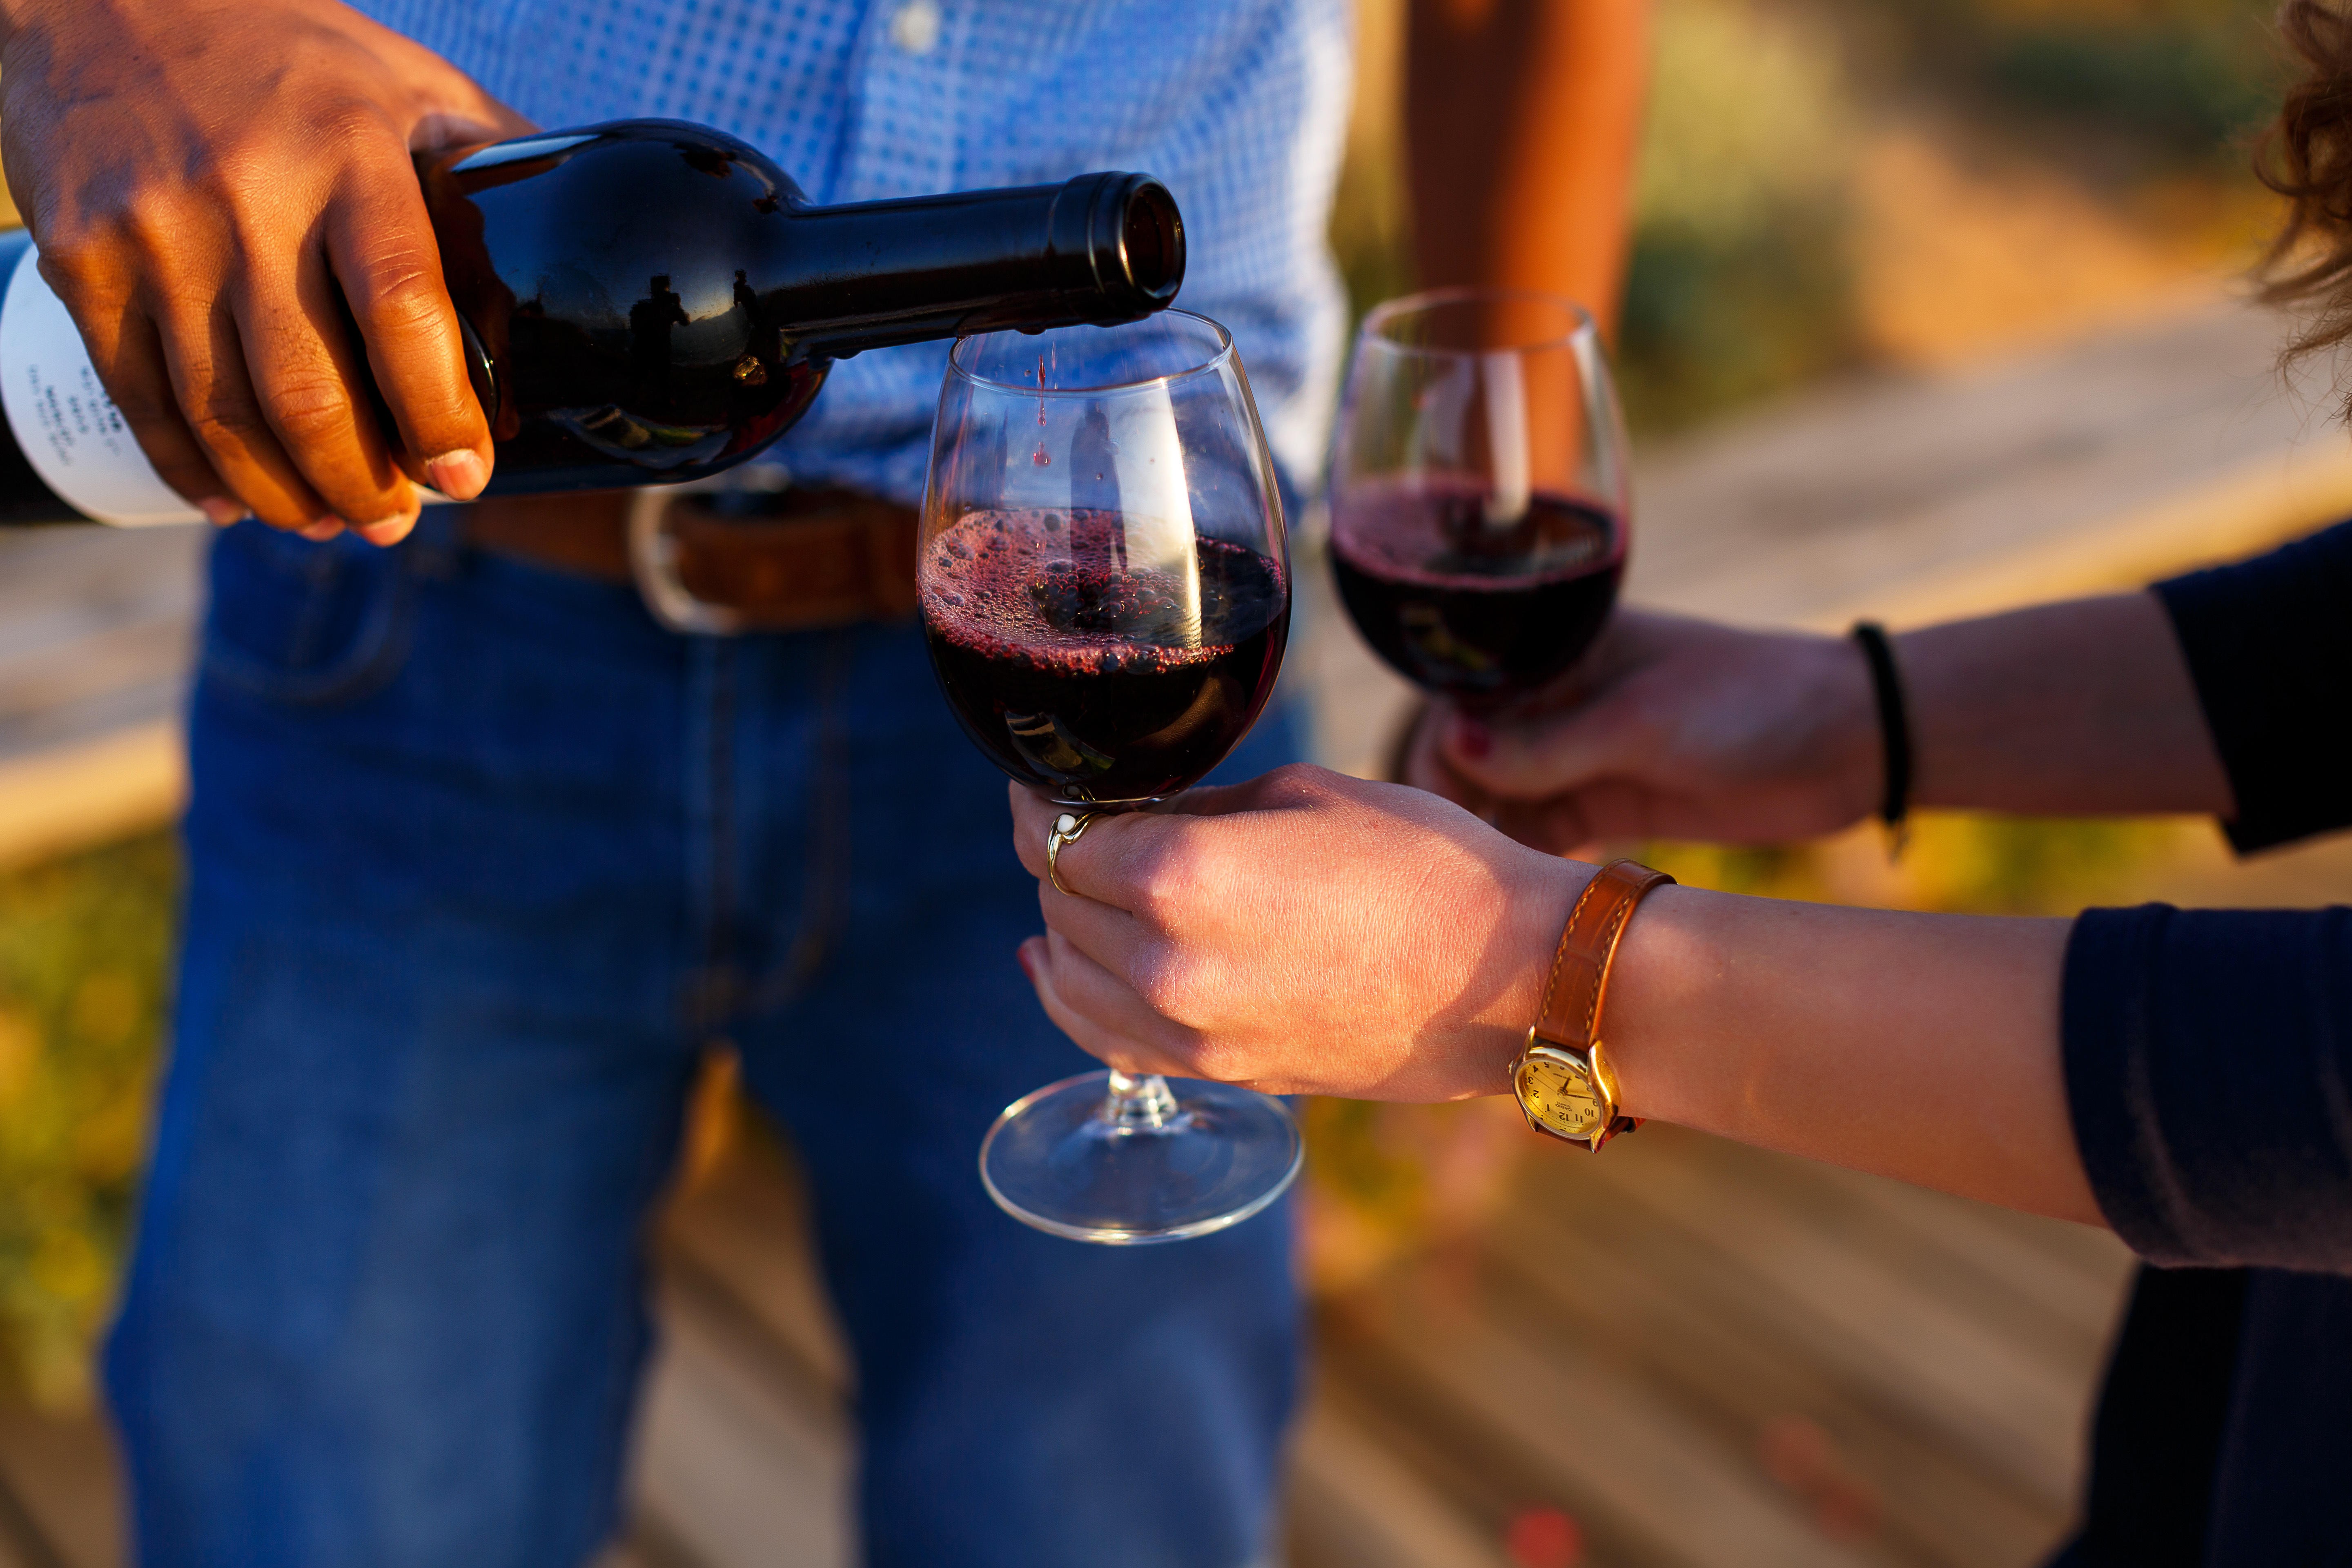 Red wine’s purported health benefits include lowering bad cholesterol, preventing clots and reduce the growth of precancerous cells in premenopausal women. Picture: Alamy